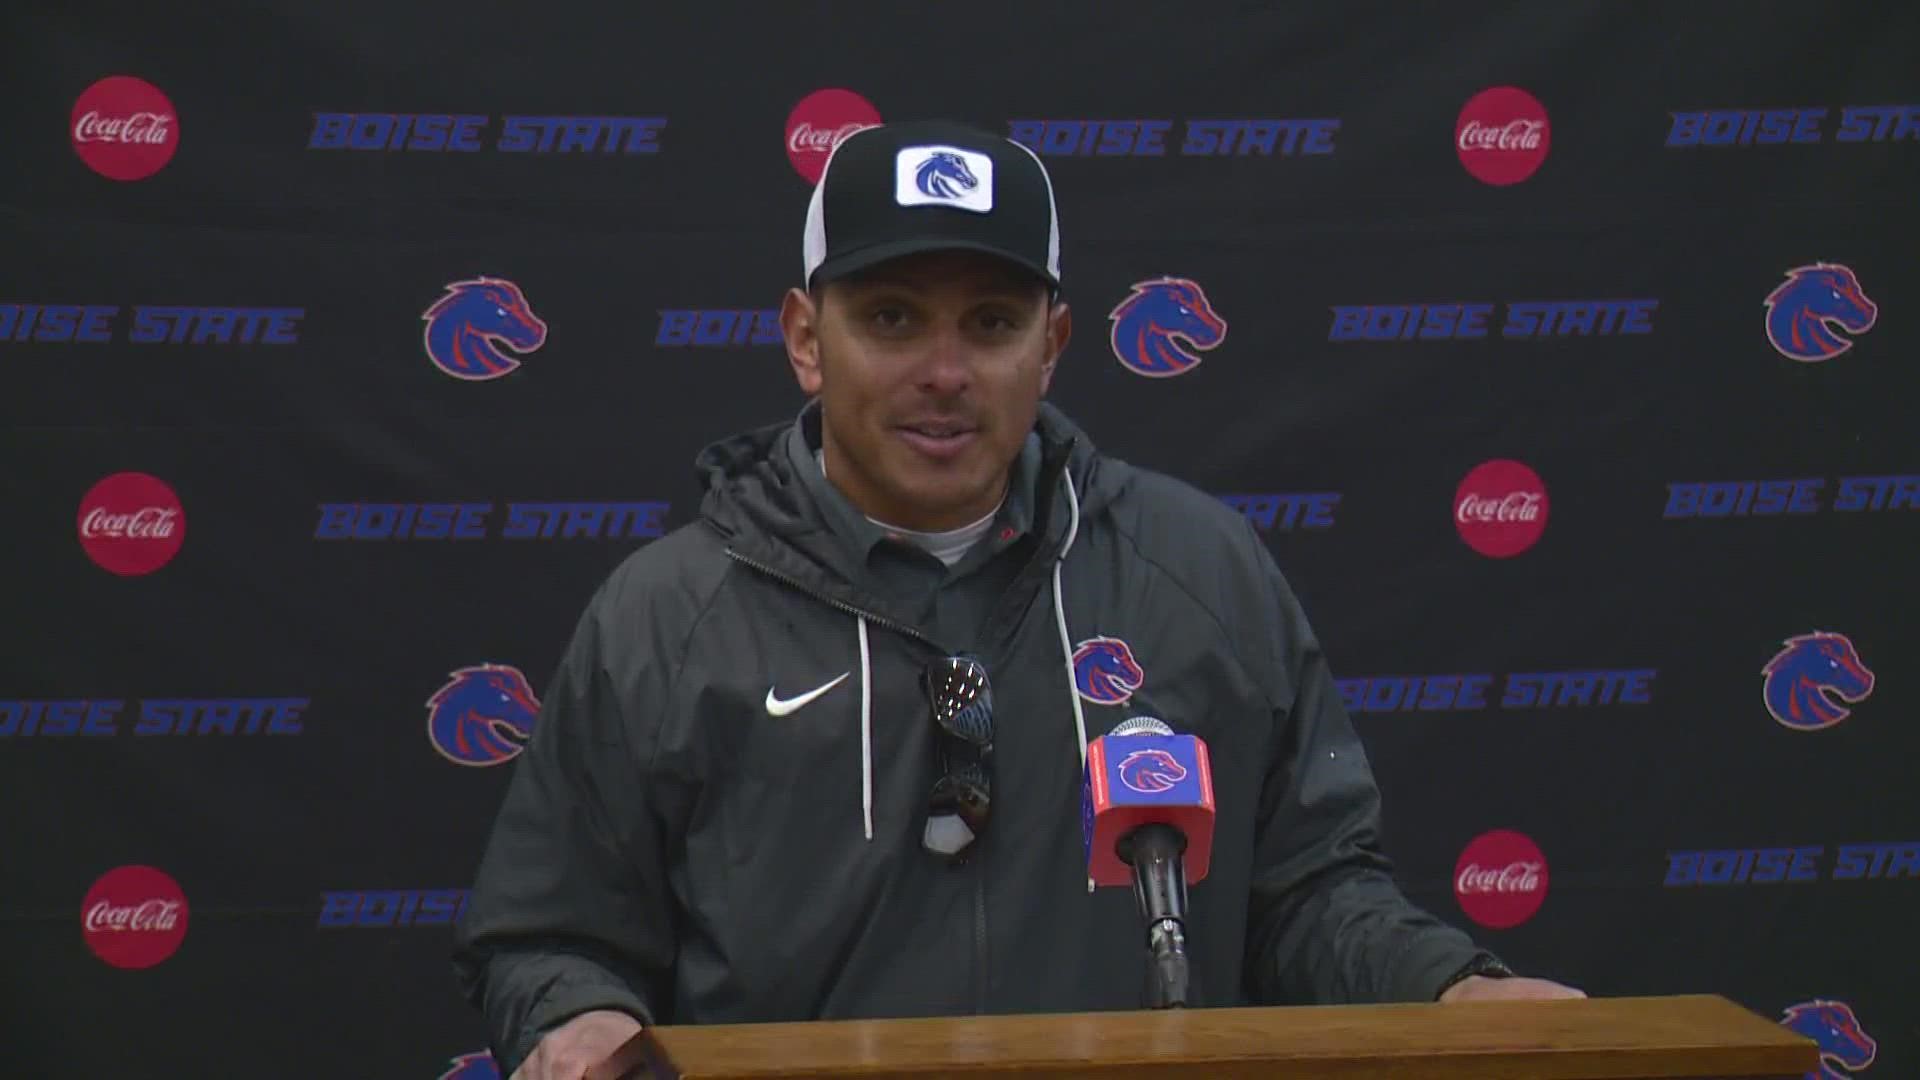 Avalos discusses Boise State's resiliency and performance on The Blue Friday, and what's ahead for Mountain West Championship week.